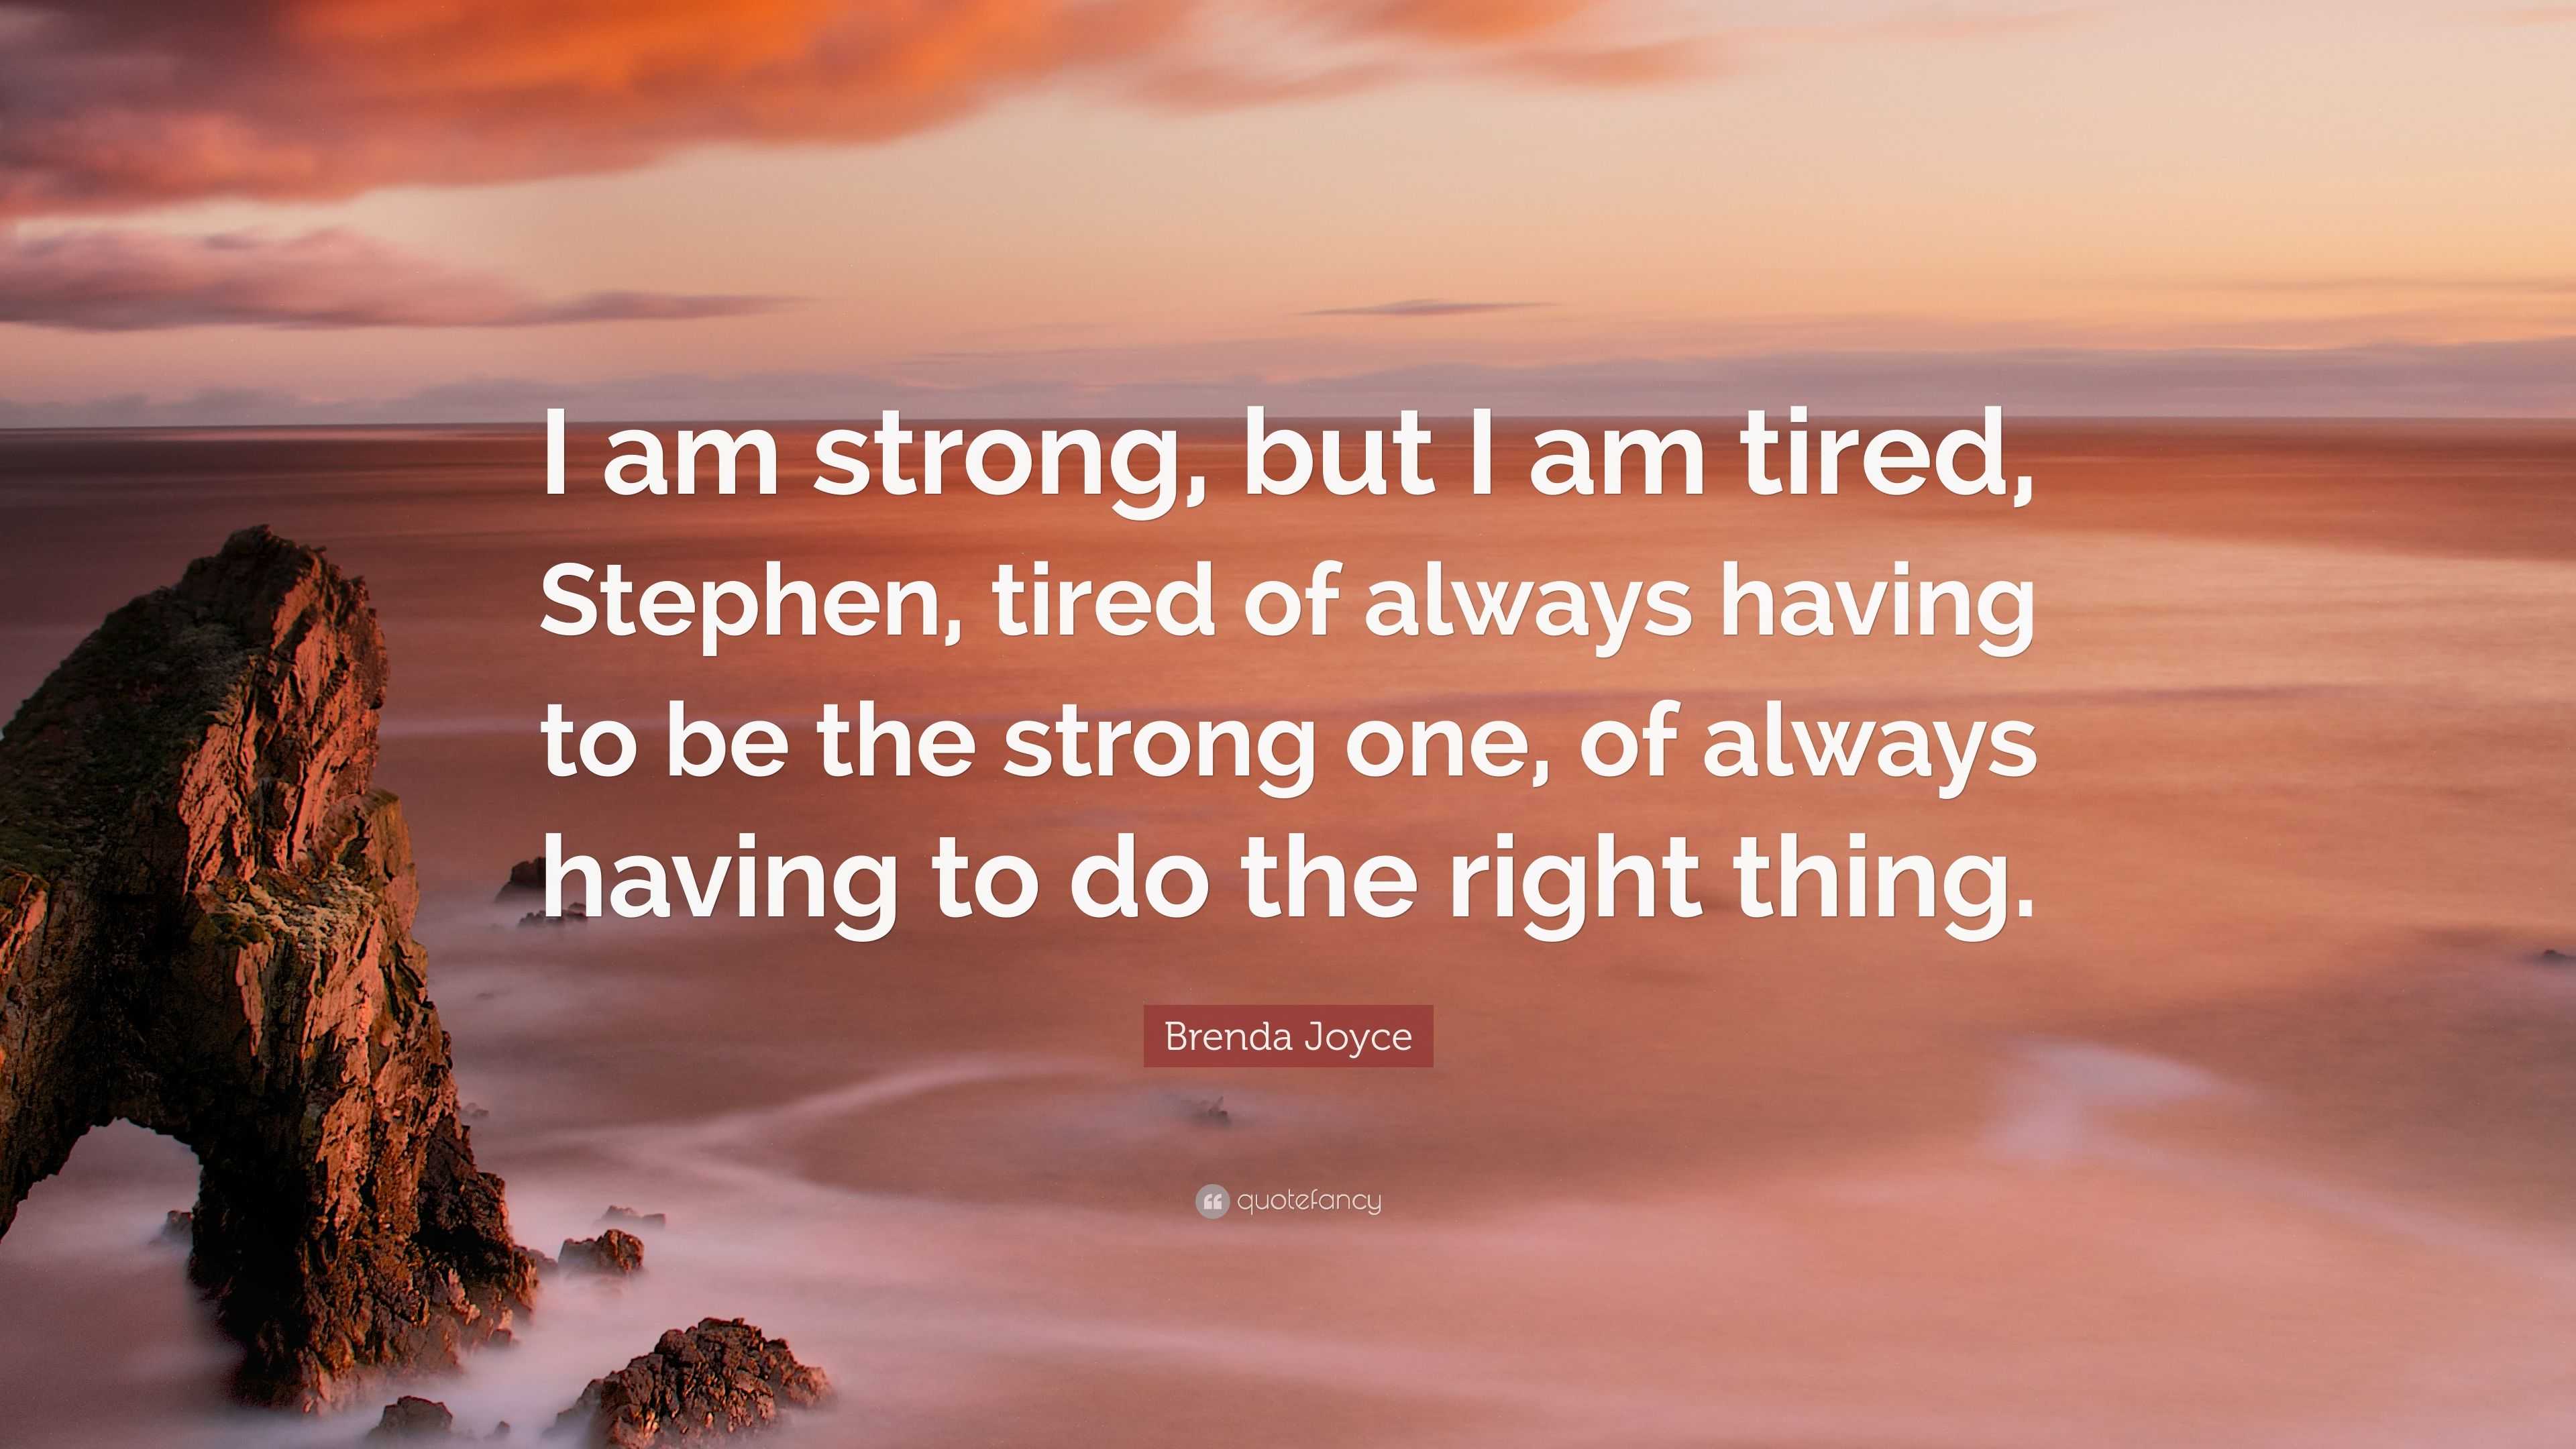 Brenda Joyce Quote: "I am strong, but I am tired, Stephen ...